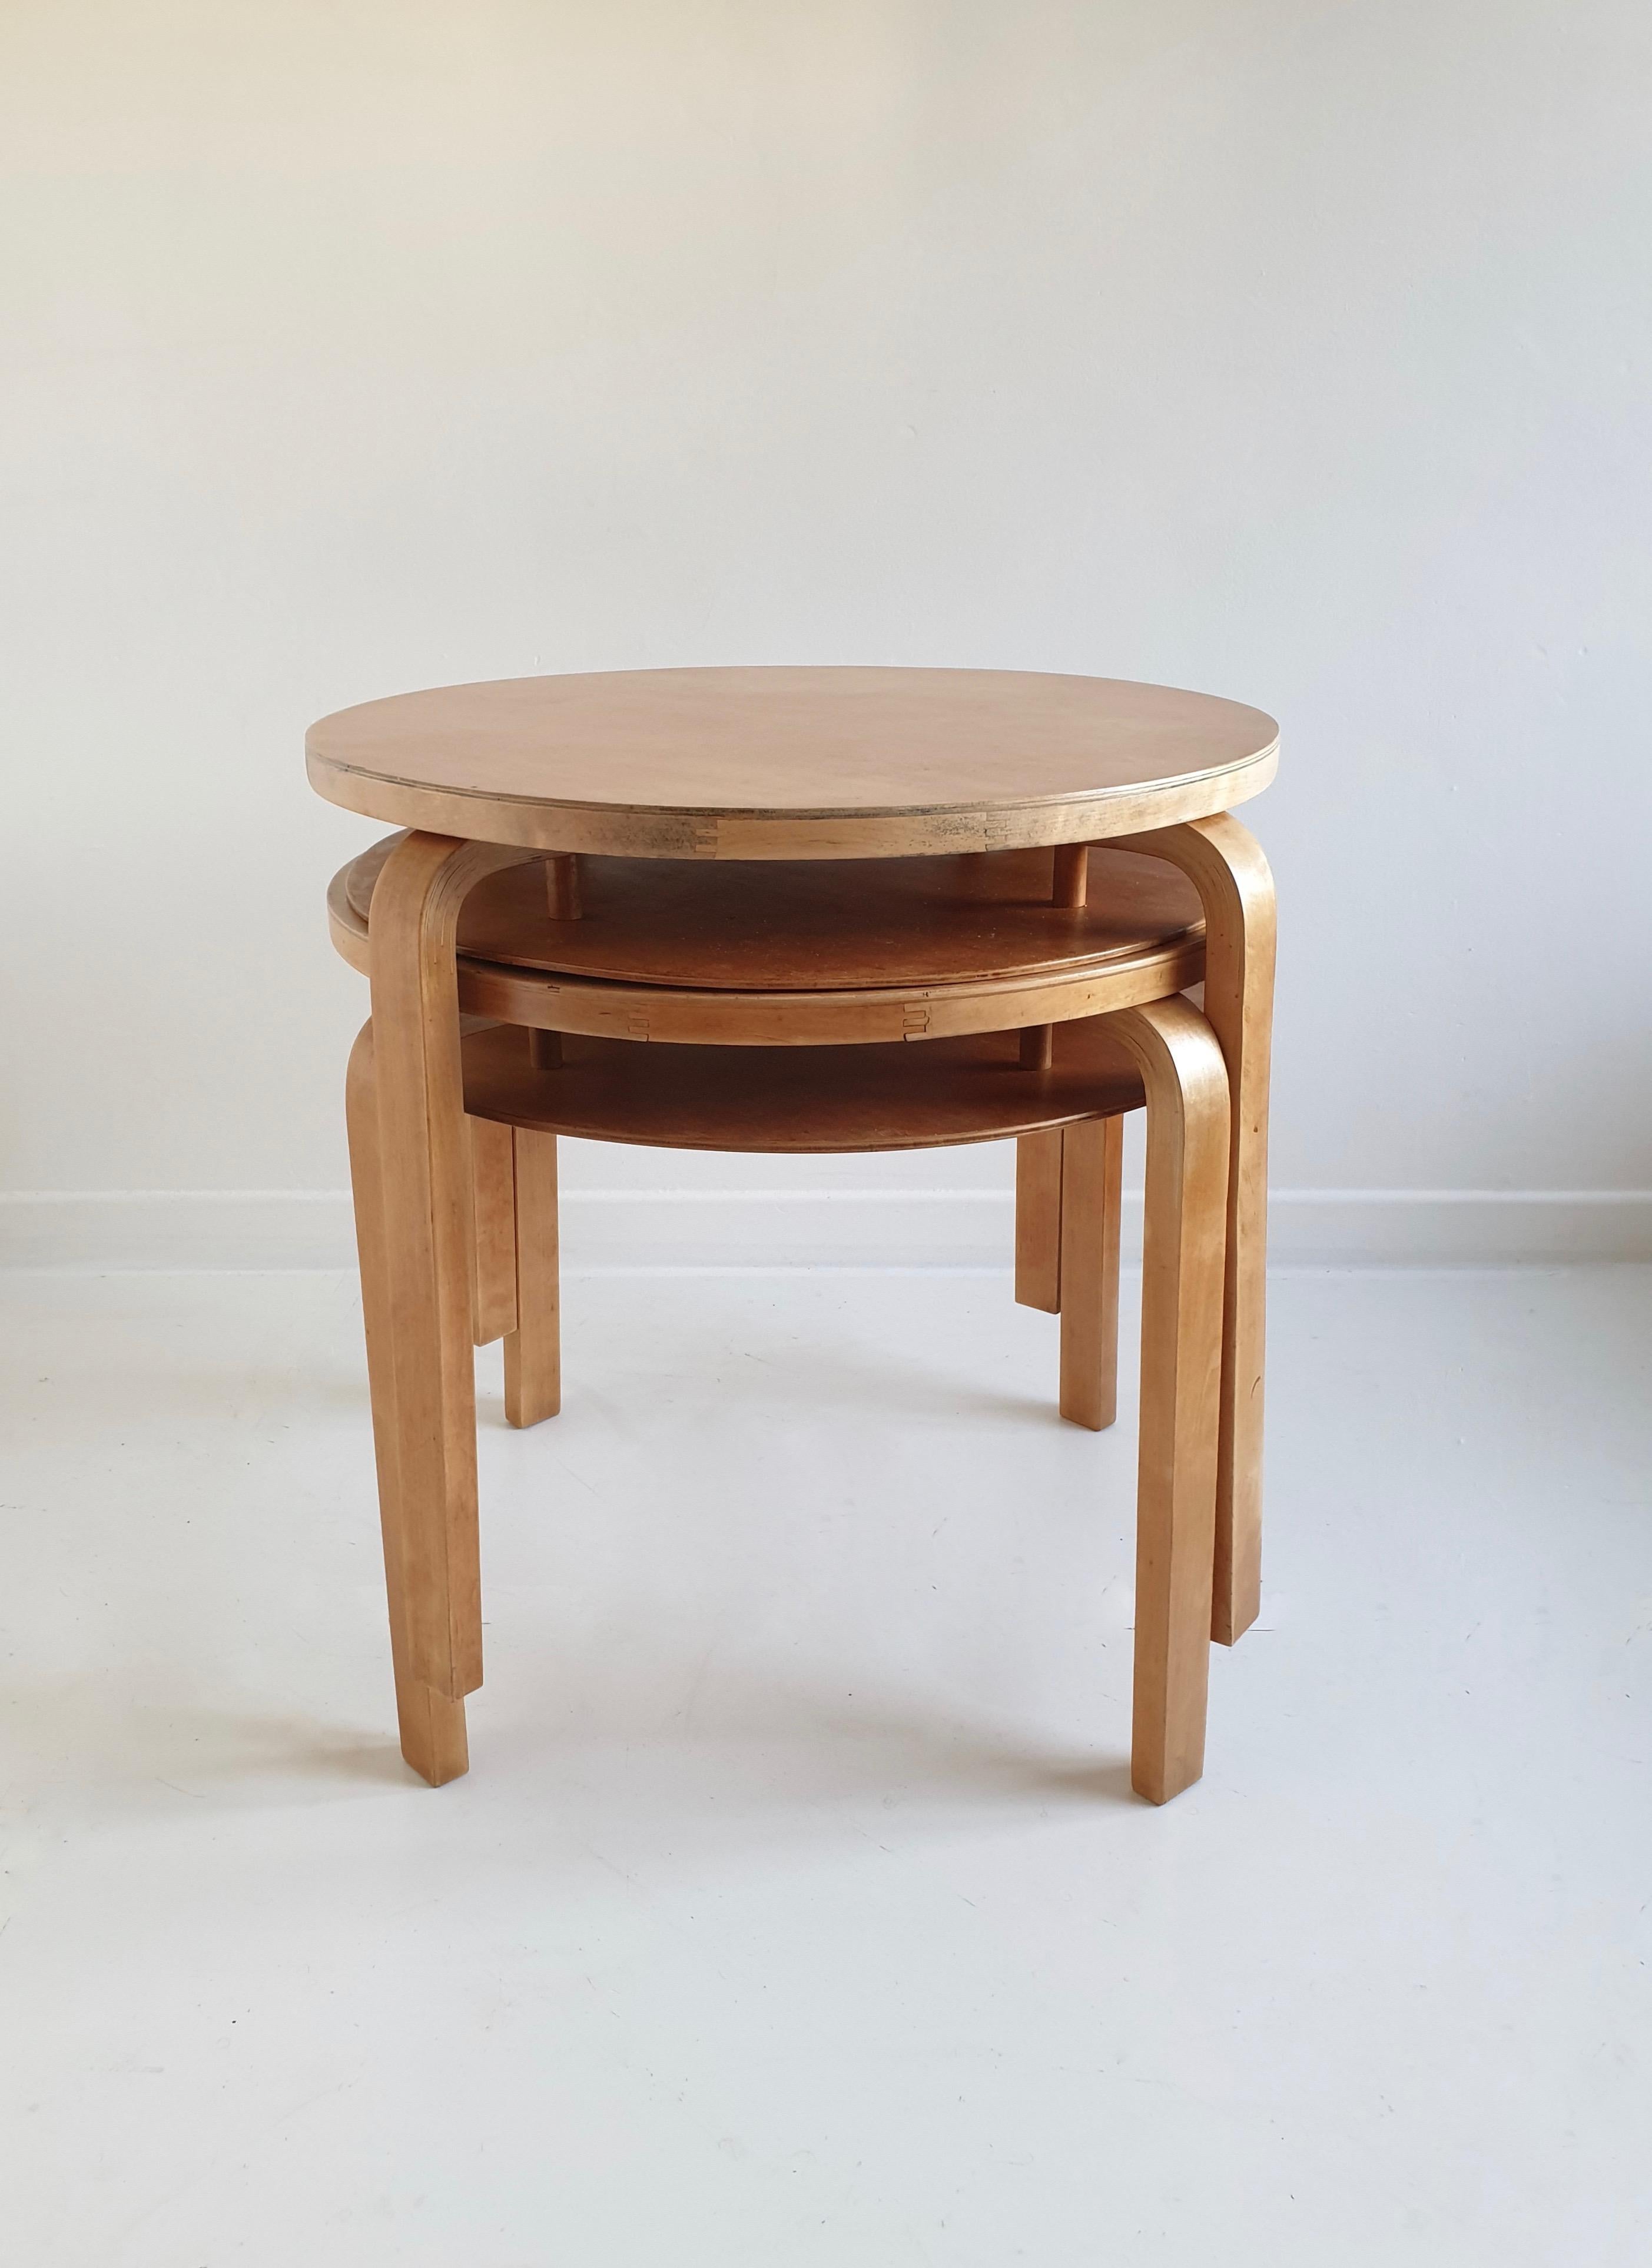 This is a pair of rare 907 tables designed by Alvar Aalto, manufactured by Artek and distributed to the UK by Finmar in the 1940s. Designed in 1933 these elegant side tables are formed of solid birch and birch ply, featuring Aalto's now iconic